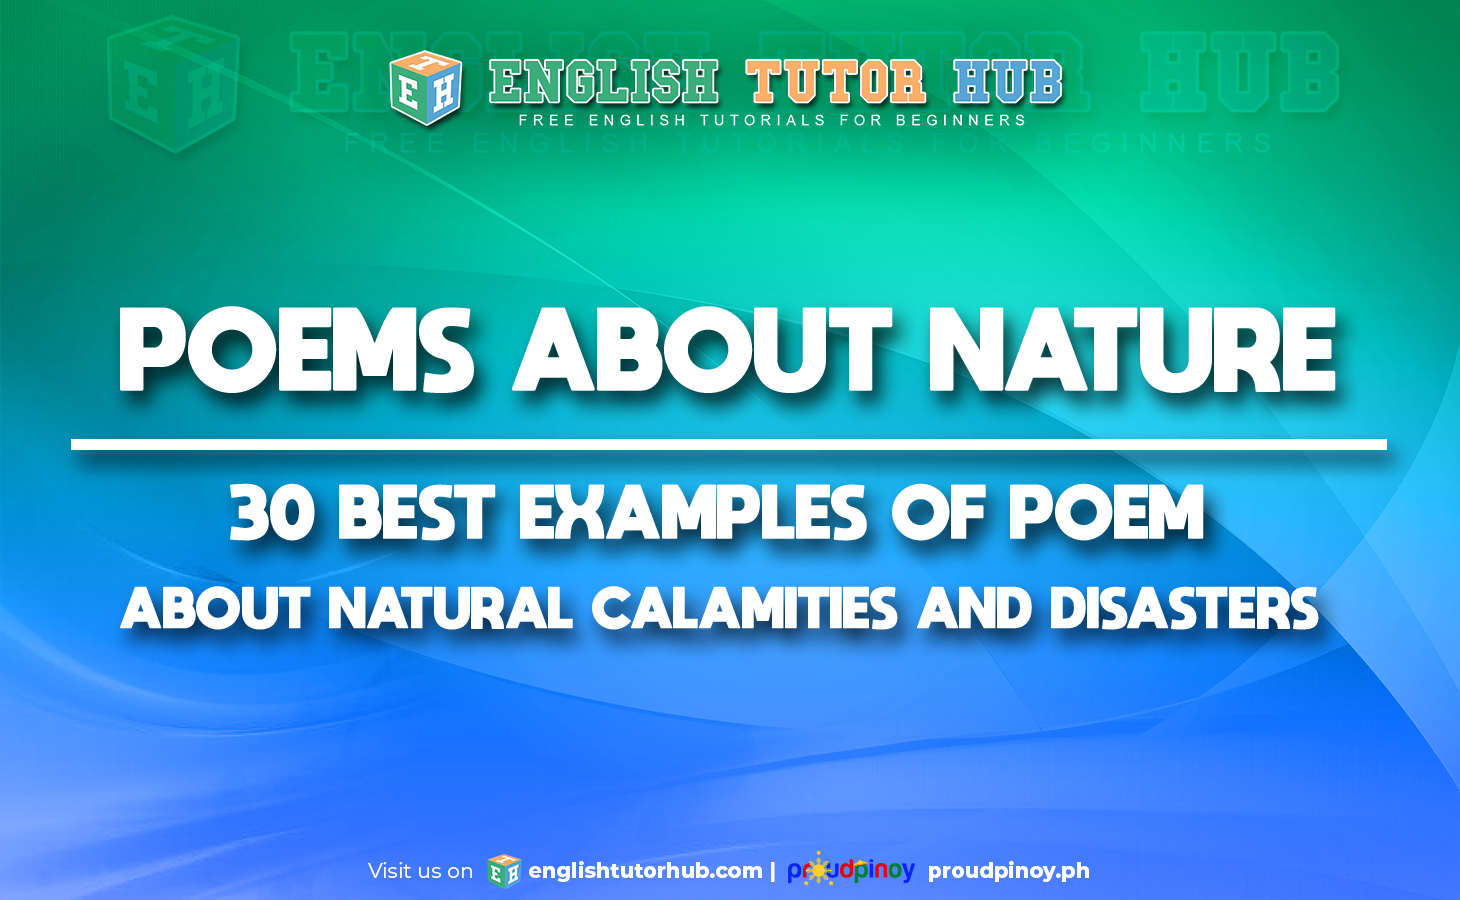 POEMS ABOUT NATURE - 30 BEST EXAMPLES OF POEM ABOUT NATURAL CALAMITIES AND DISASTERS